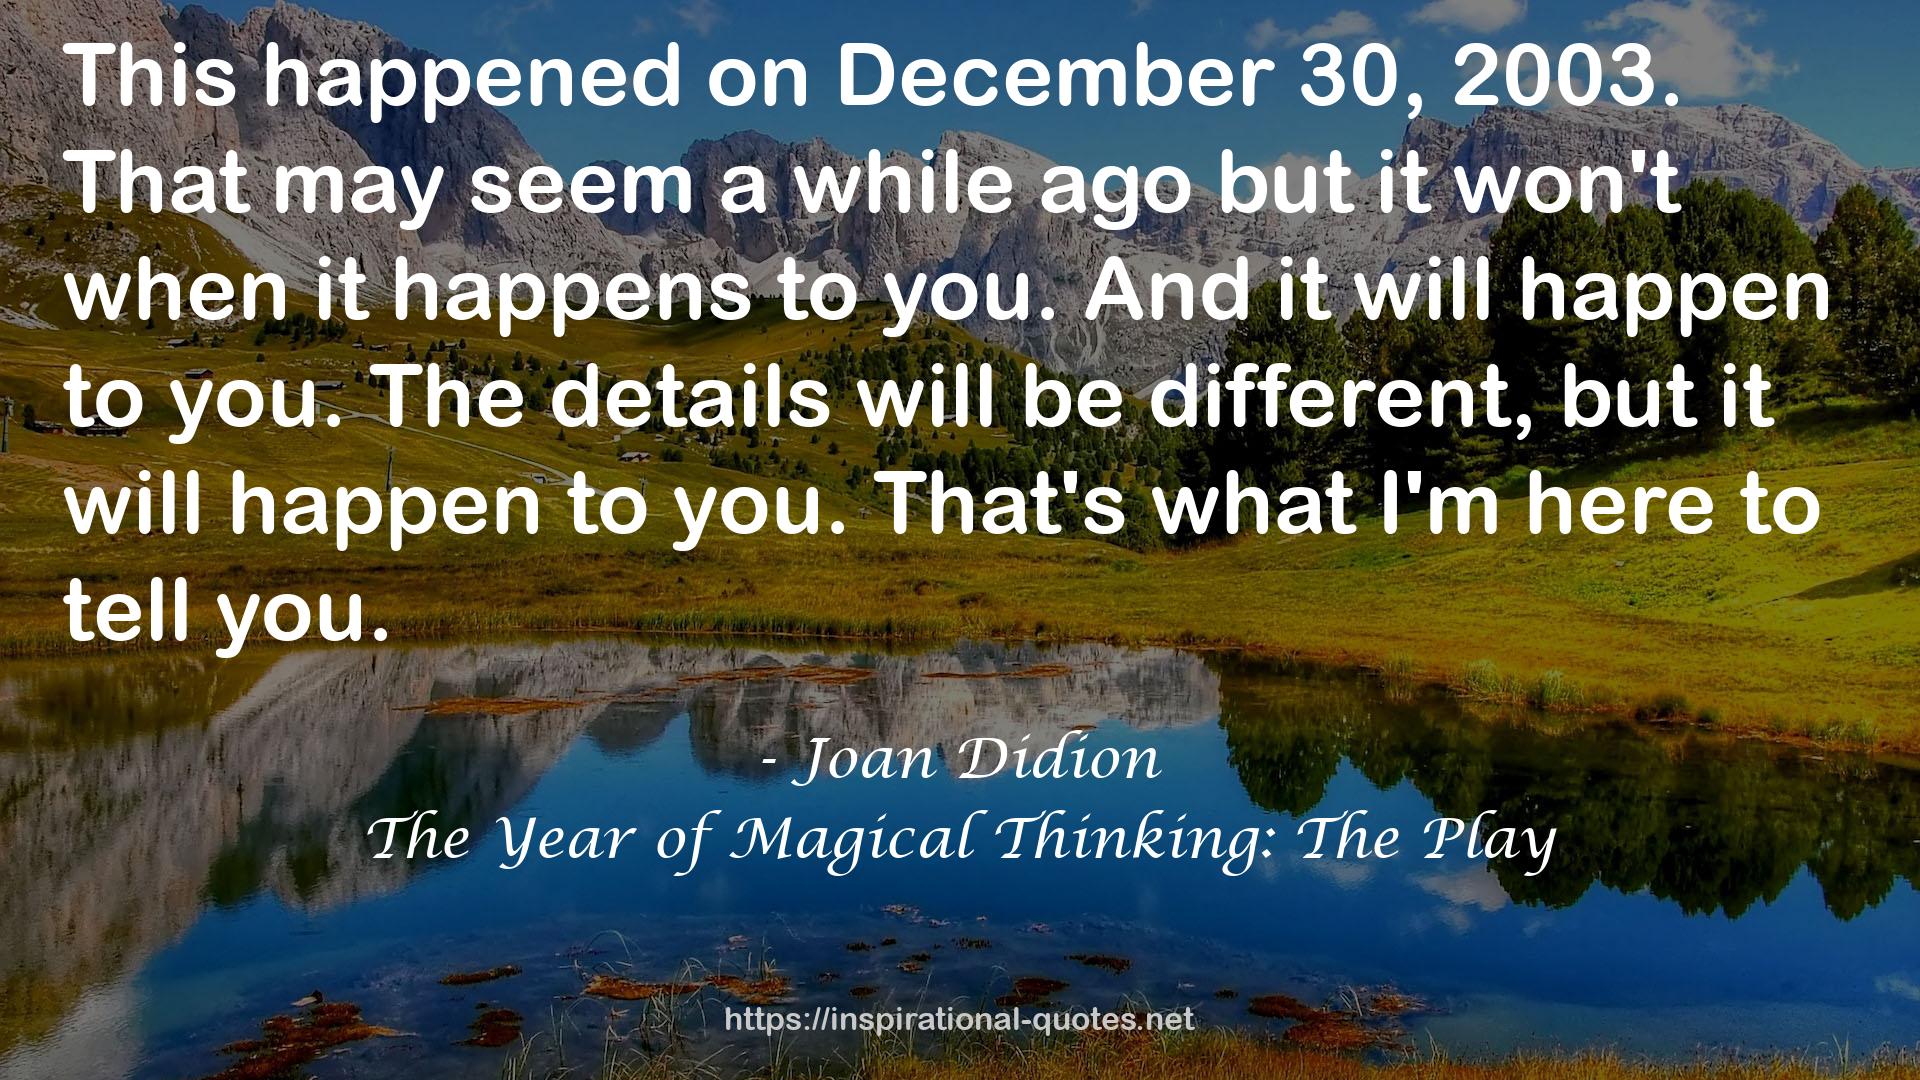 The Year of Magical Thinking: The Play QUOTES